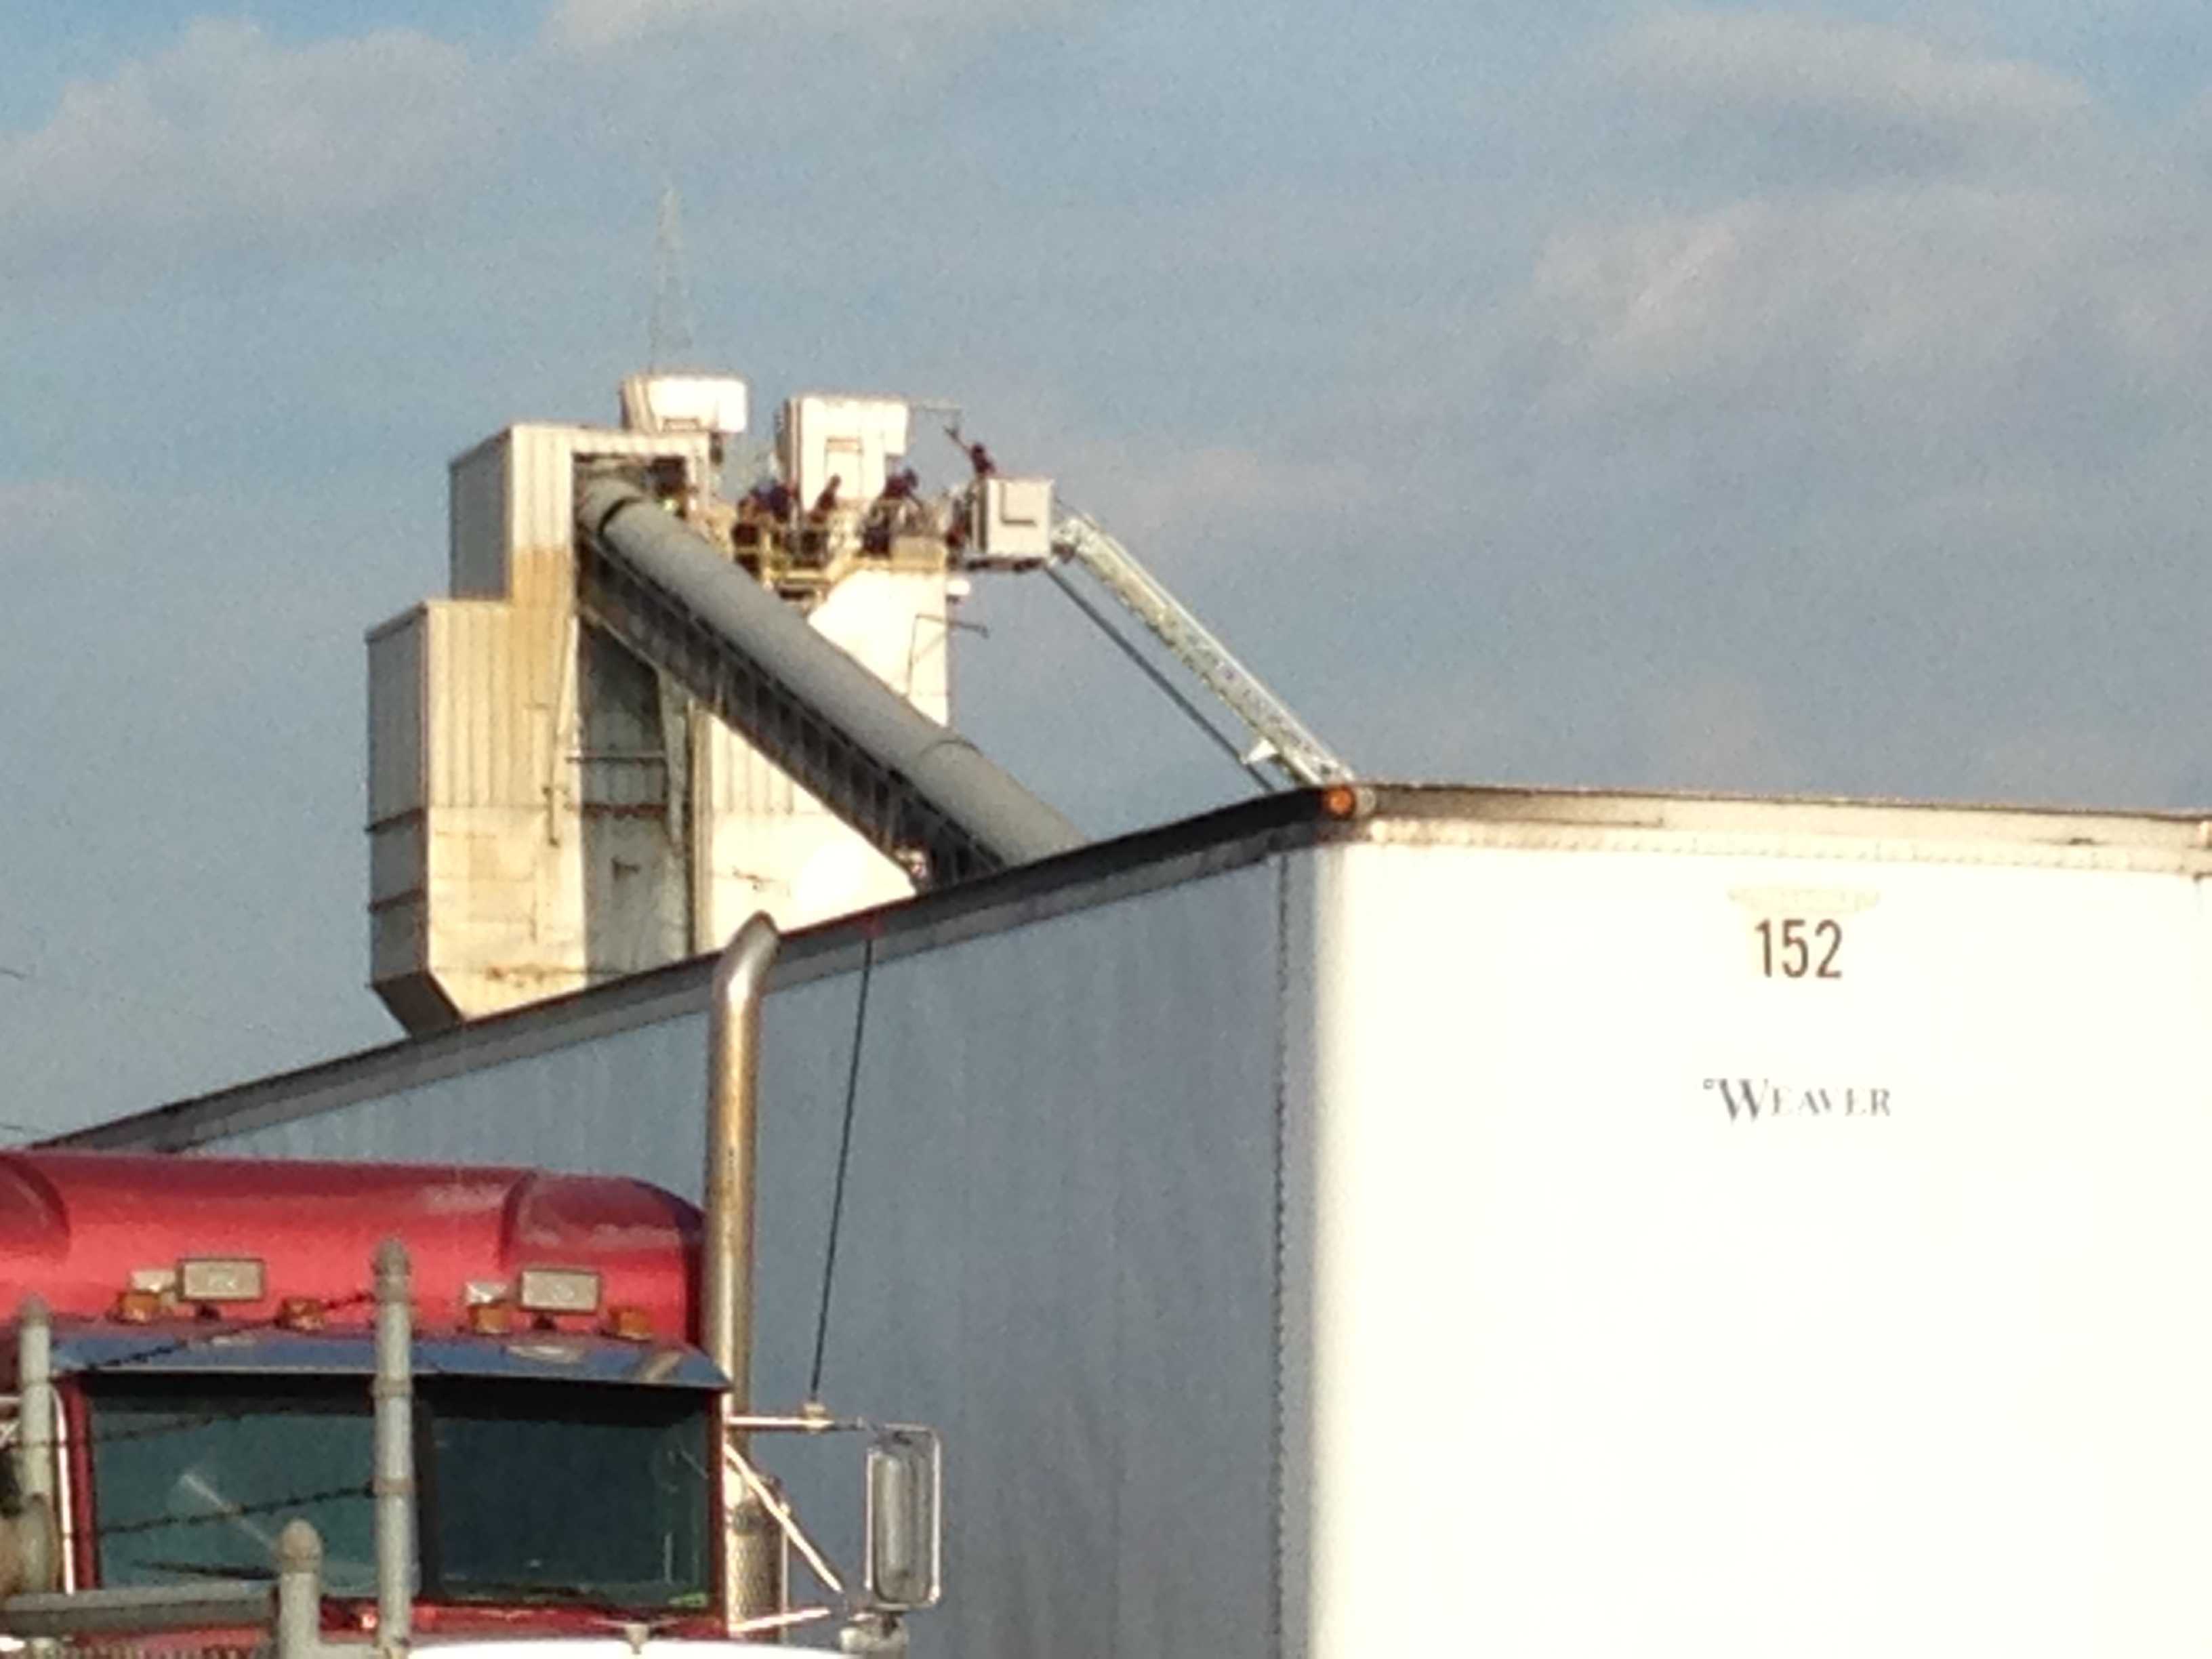 silo falls on tractor during demo